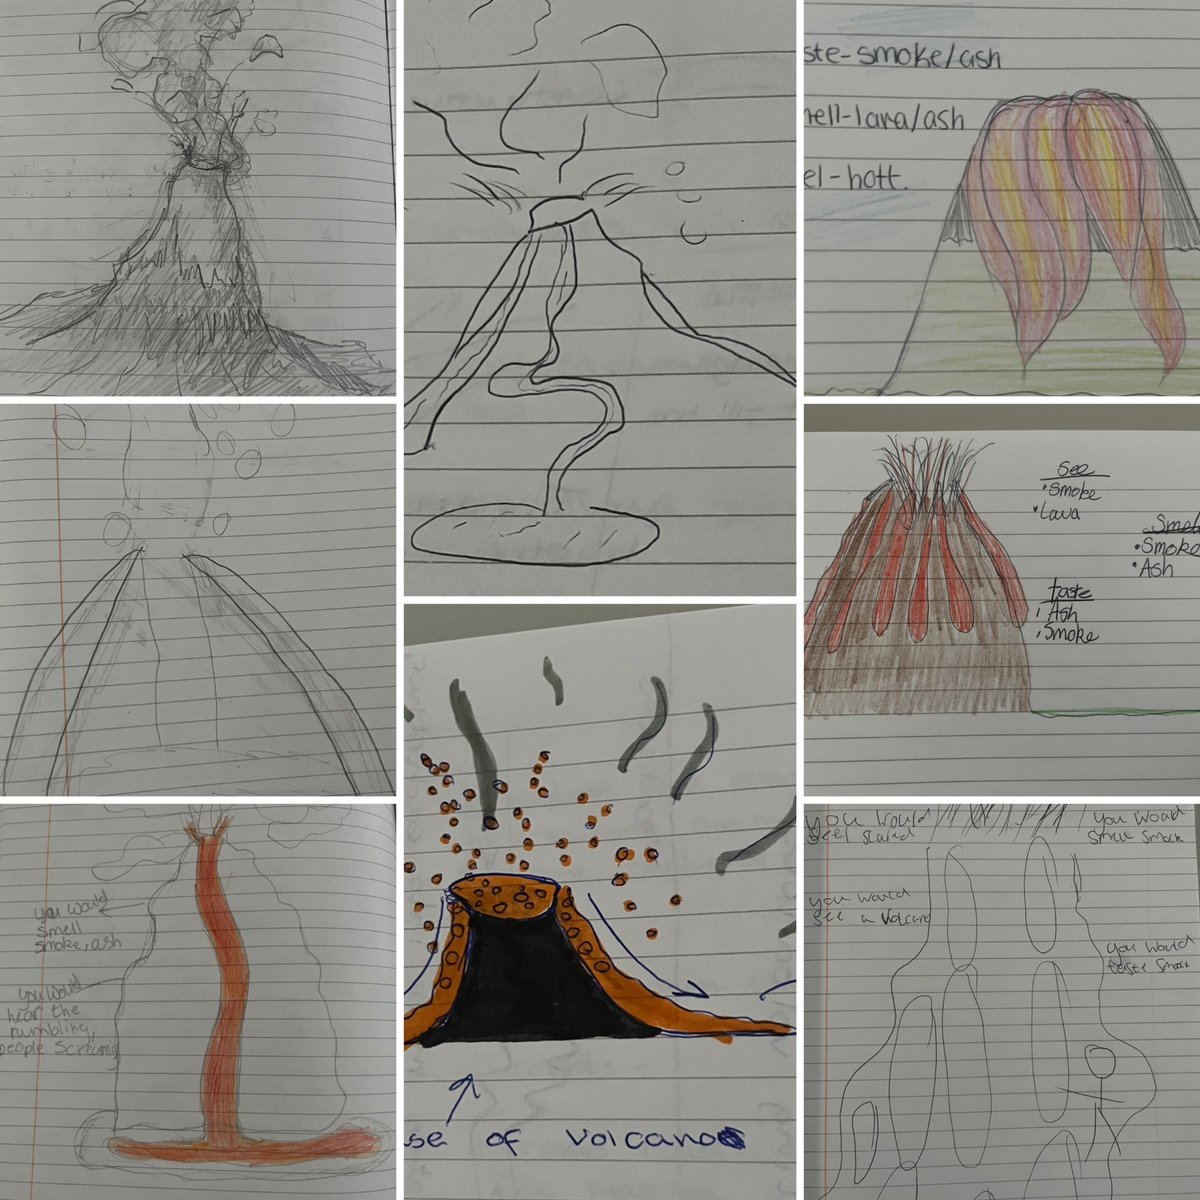 Today S2 Geography were thinking about our senses whilst drawing pictures of volcanoes. They were discussing the things they might see, hear and smell during an eruption. #braesbigdraw #braescreativity #article13 #article31